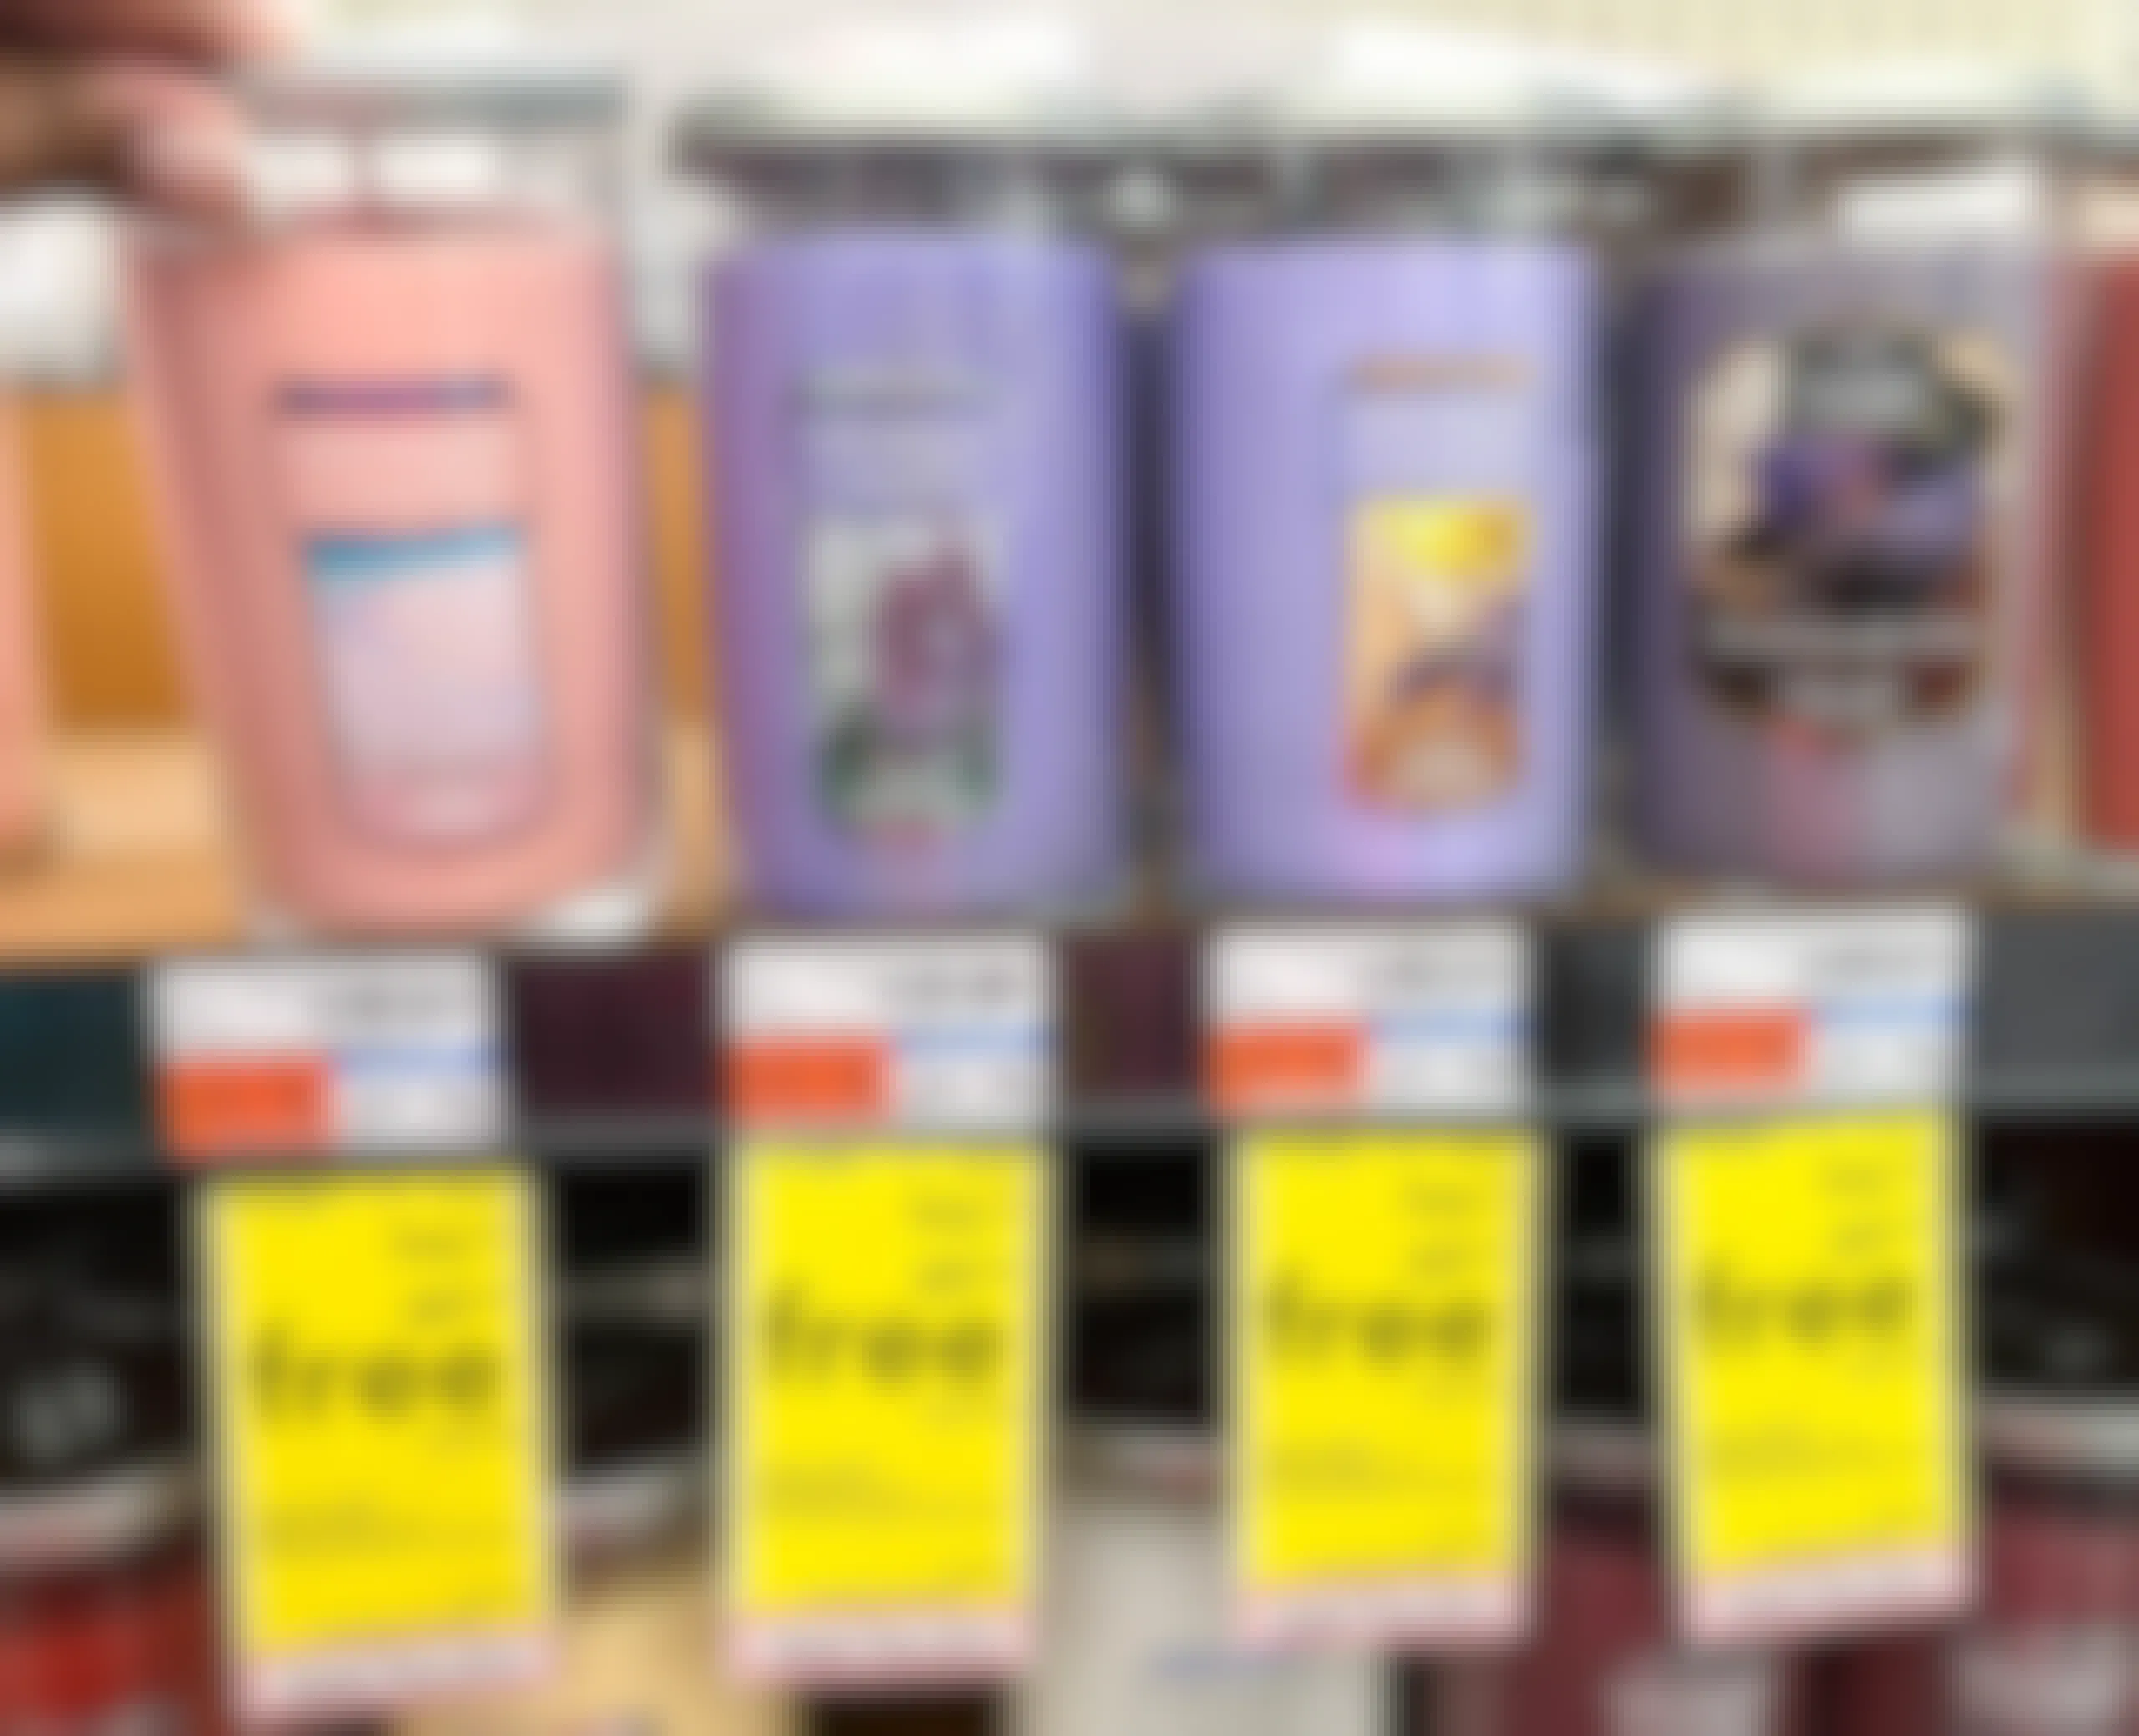 Yankee Candles on shelf with sales tag